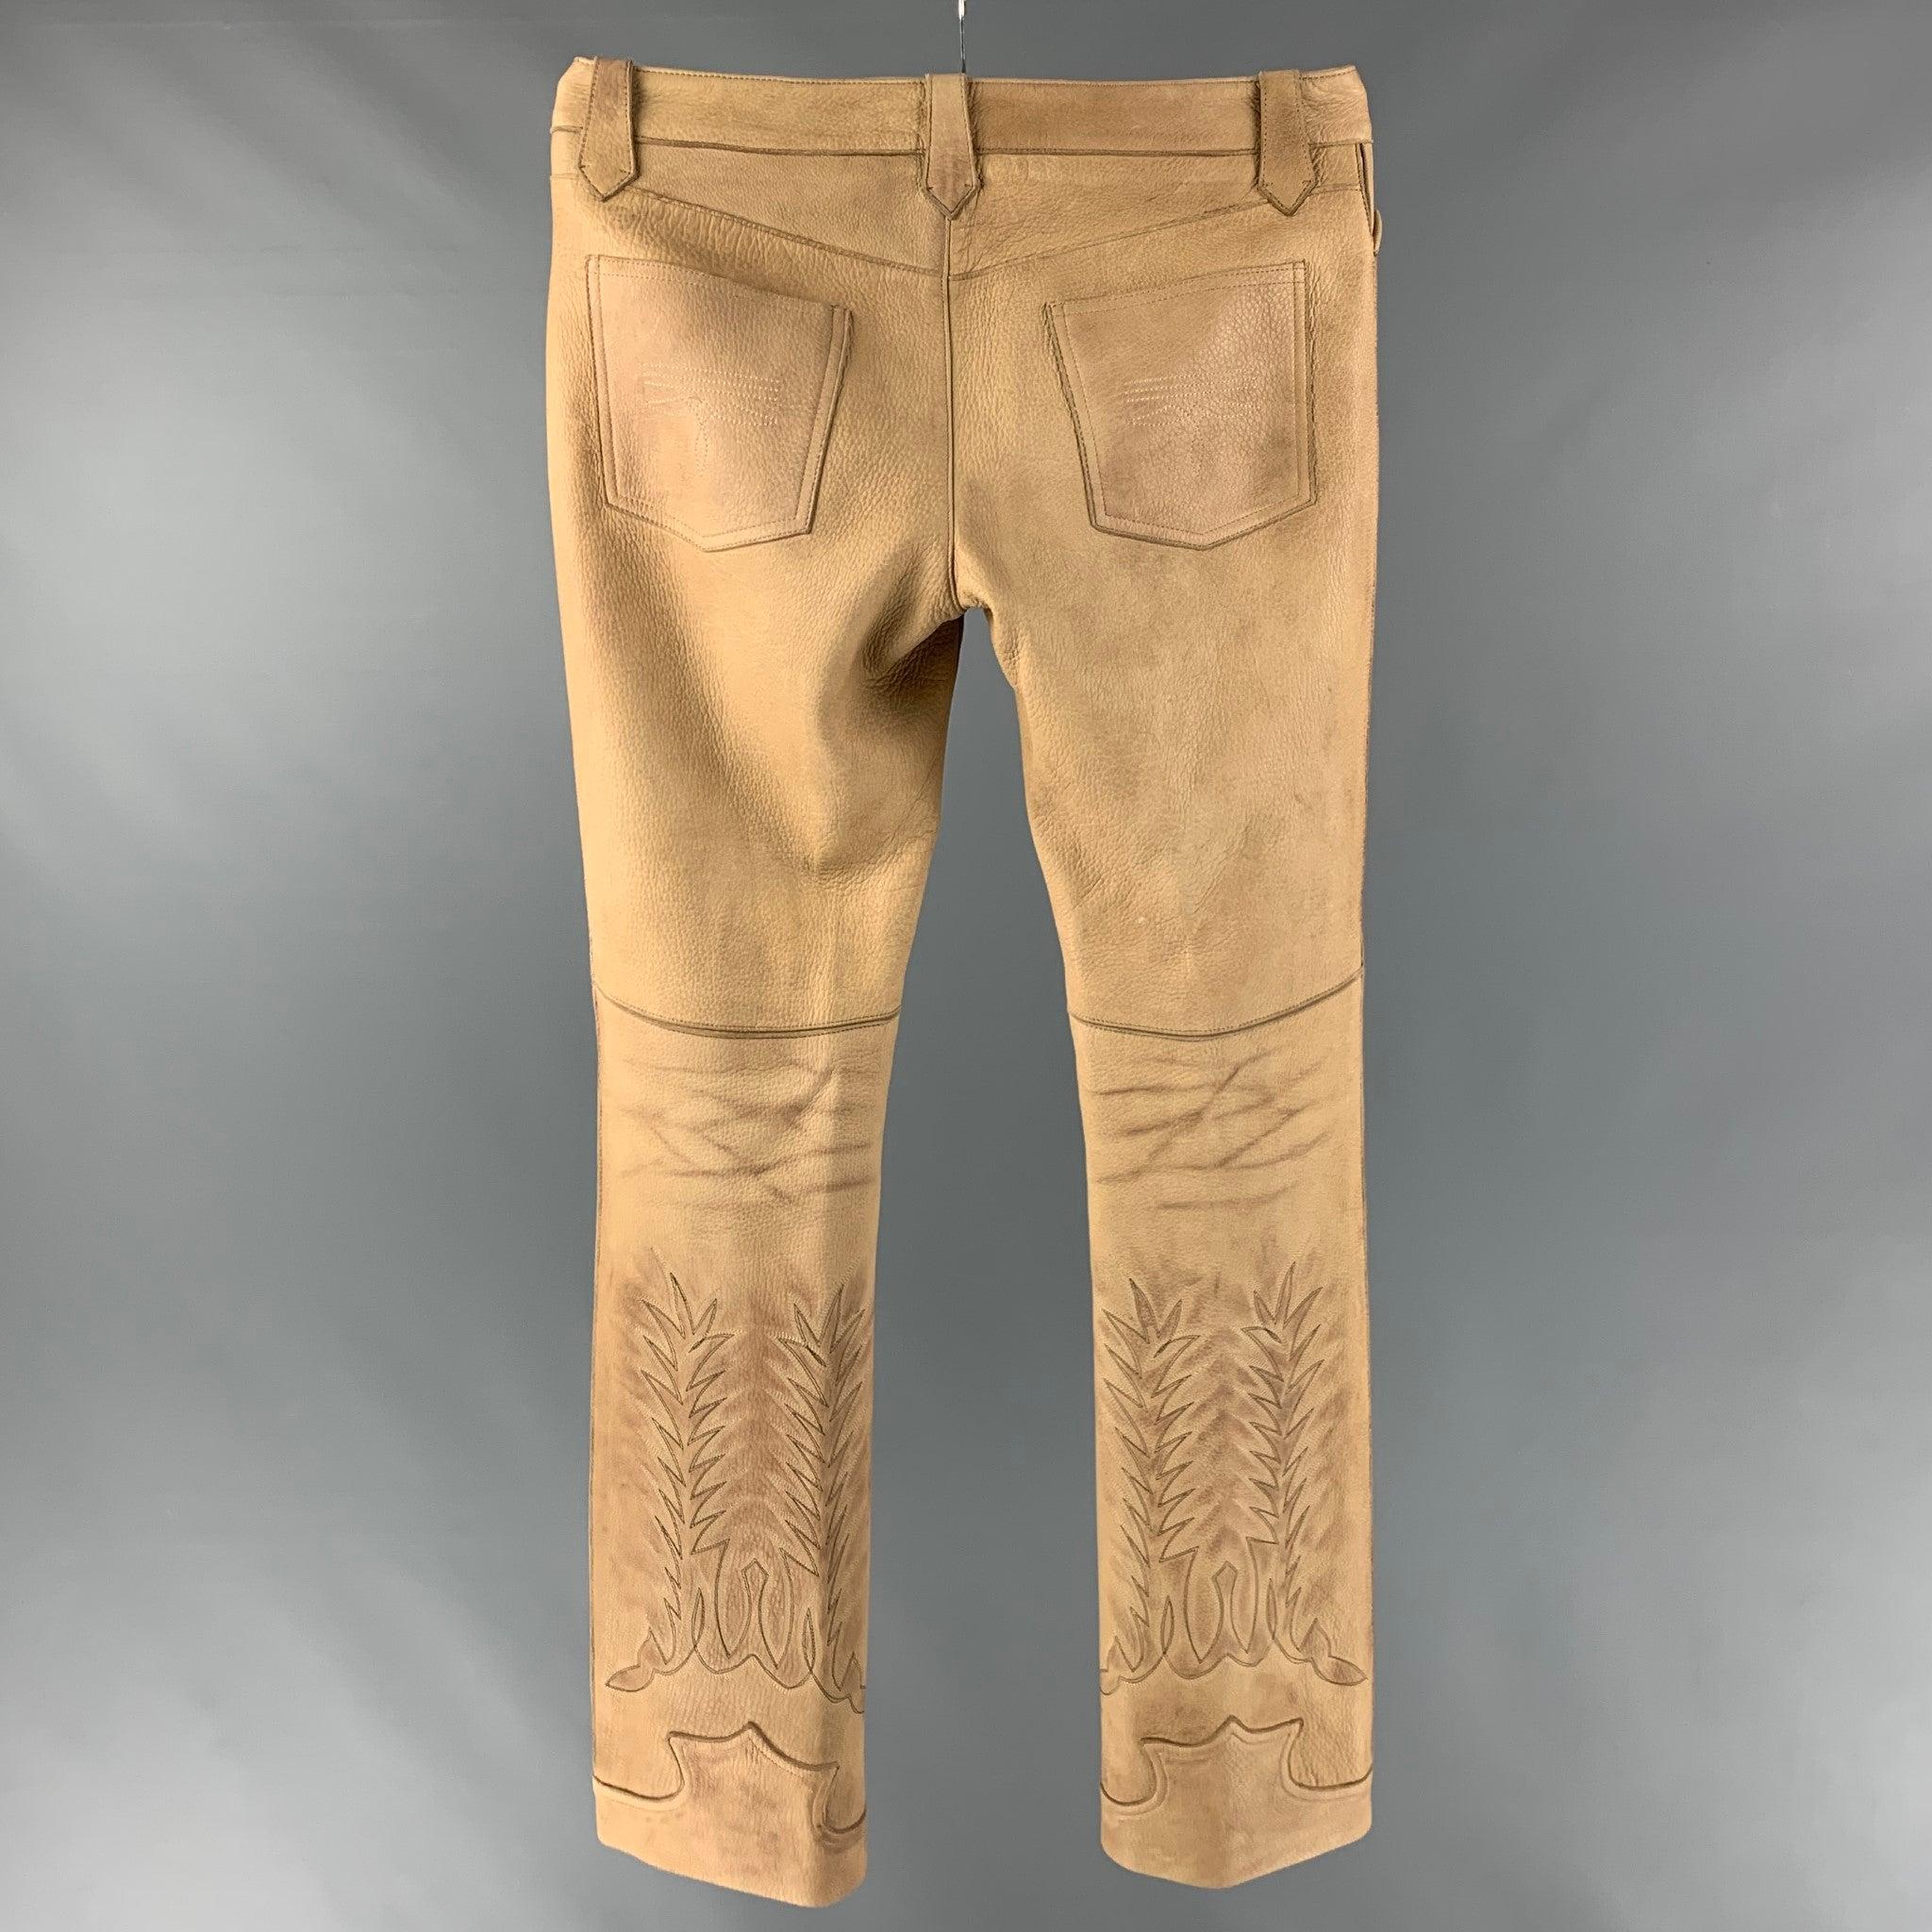 RALPH LAUREN BLUE LABEL by casual pants comes in a beige leather featuring a western style, embroidered detail, and a zip fly closure. Excellent Pre-Owned Condition. 

Marked:   10 

Measurements: 
  Waist: 34 inches Rise: 9 inches Inseam: 34 inches